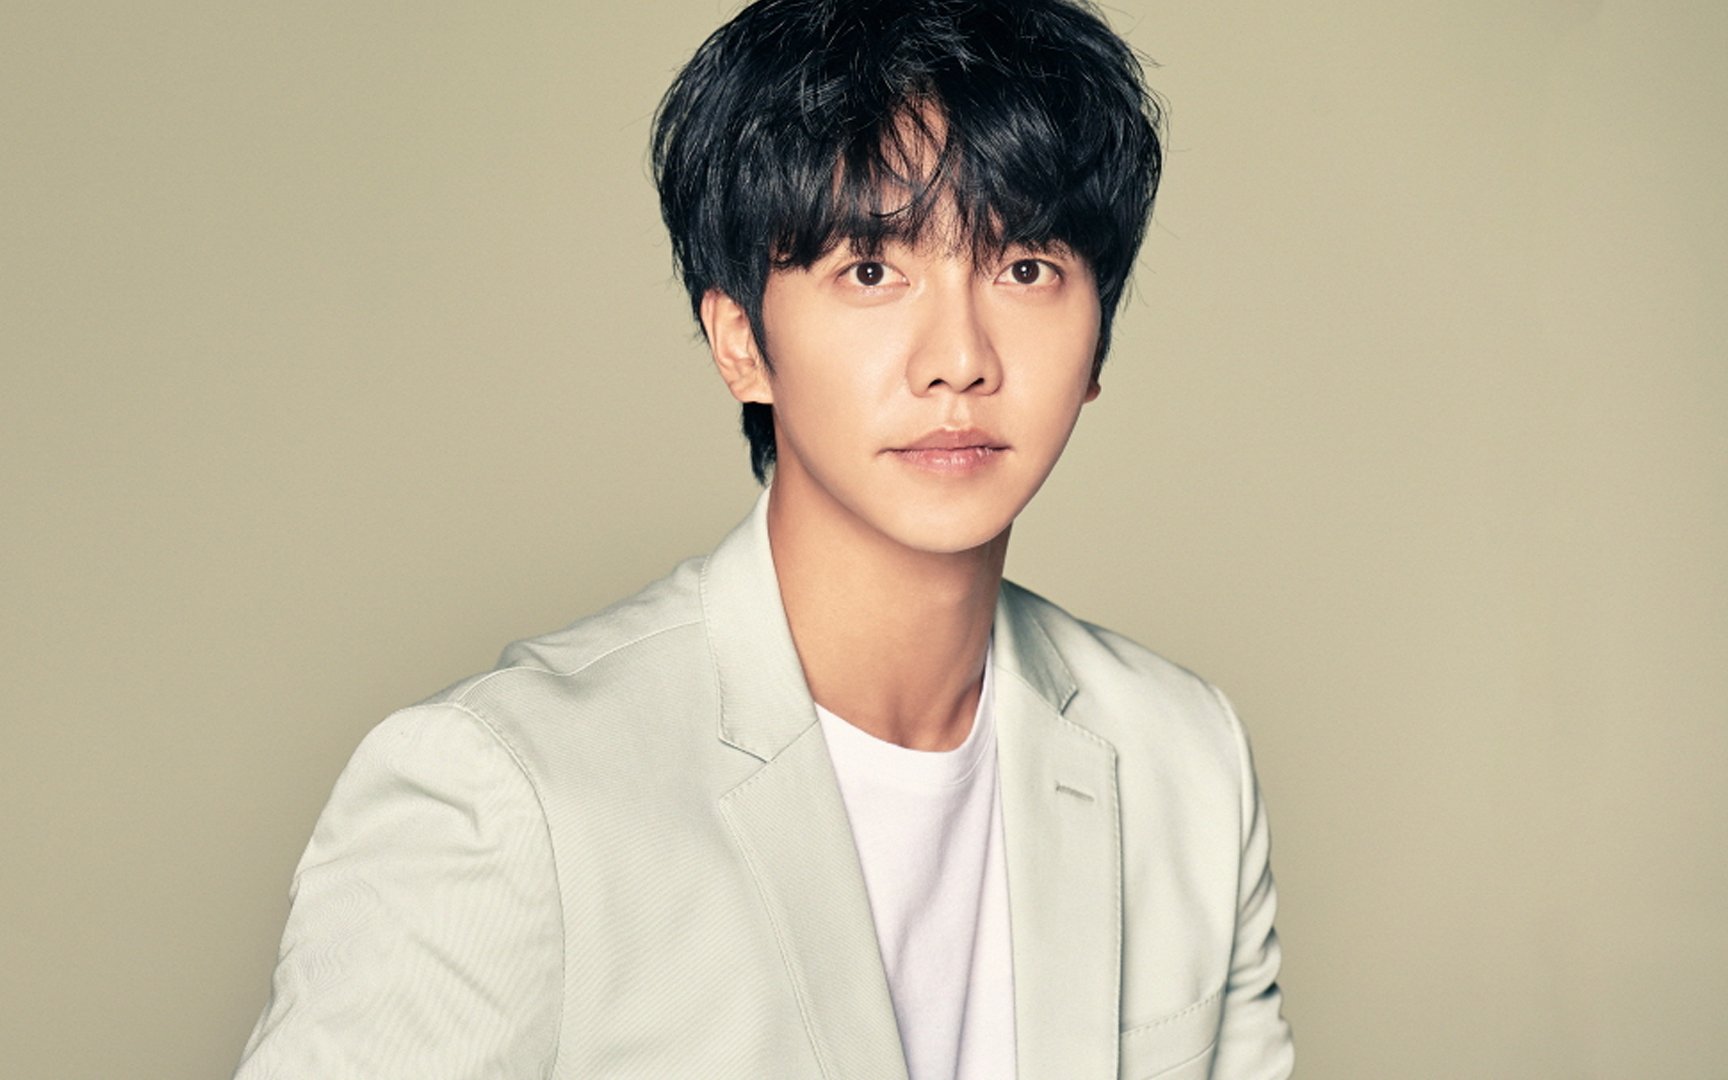 Dispatch releases voice recording of Hook Entertainment CEO threatening Lee Seung Gi’s life